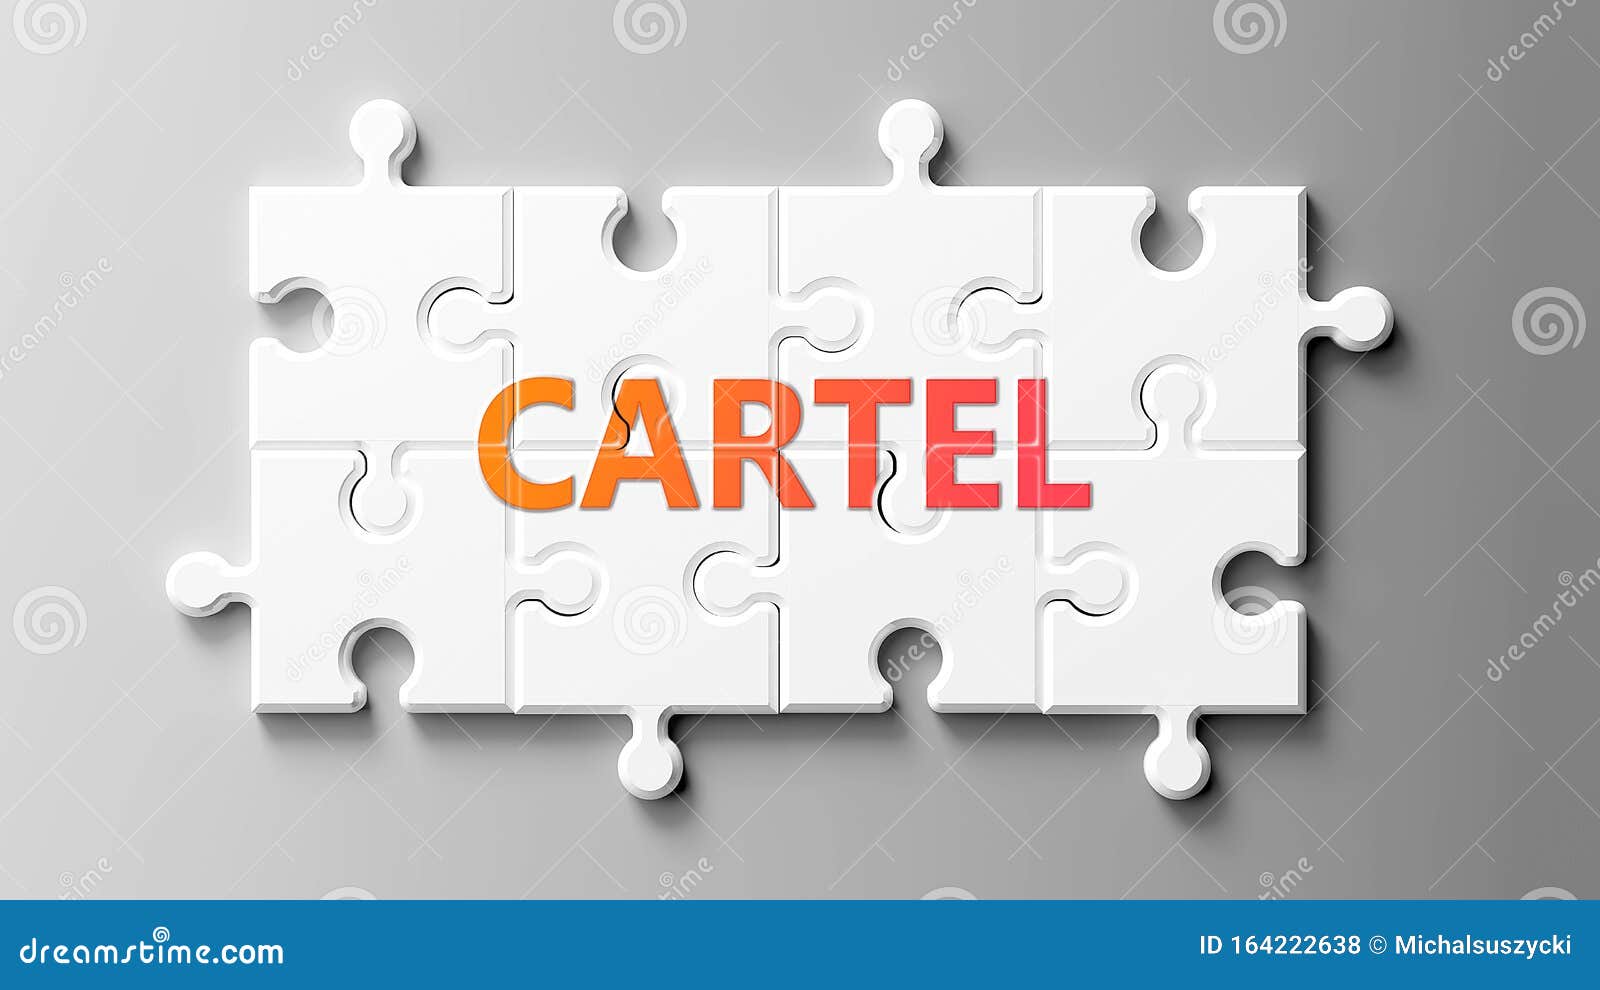 cartel complex like a puzzle - pictured as word cartel on a puzzle pieces to show that cartel can be difficult and needs